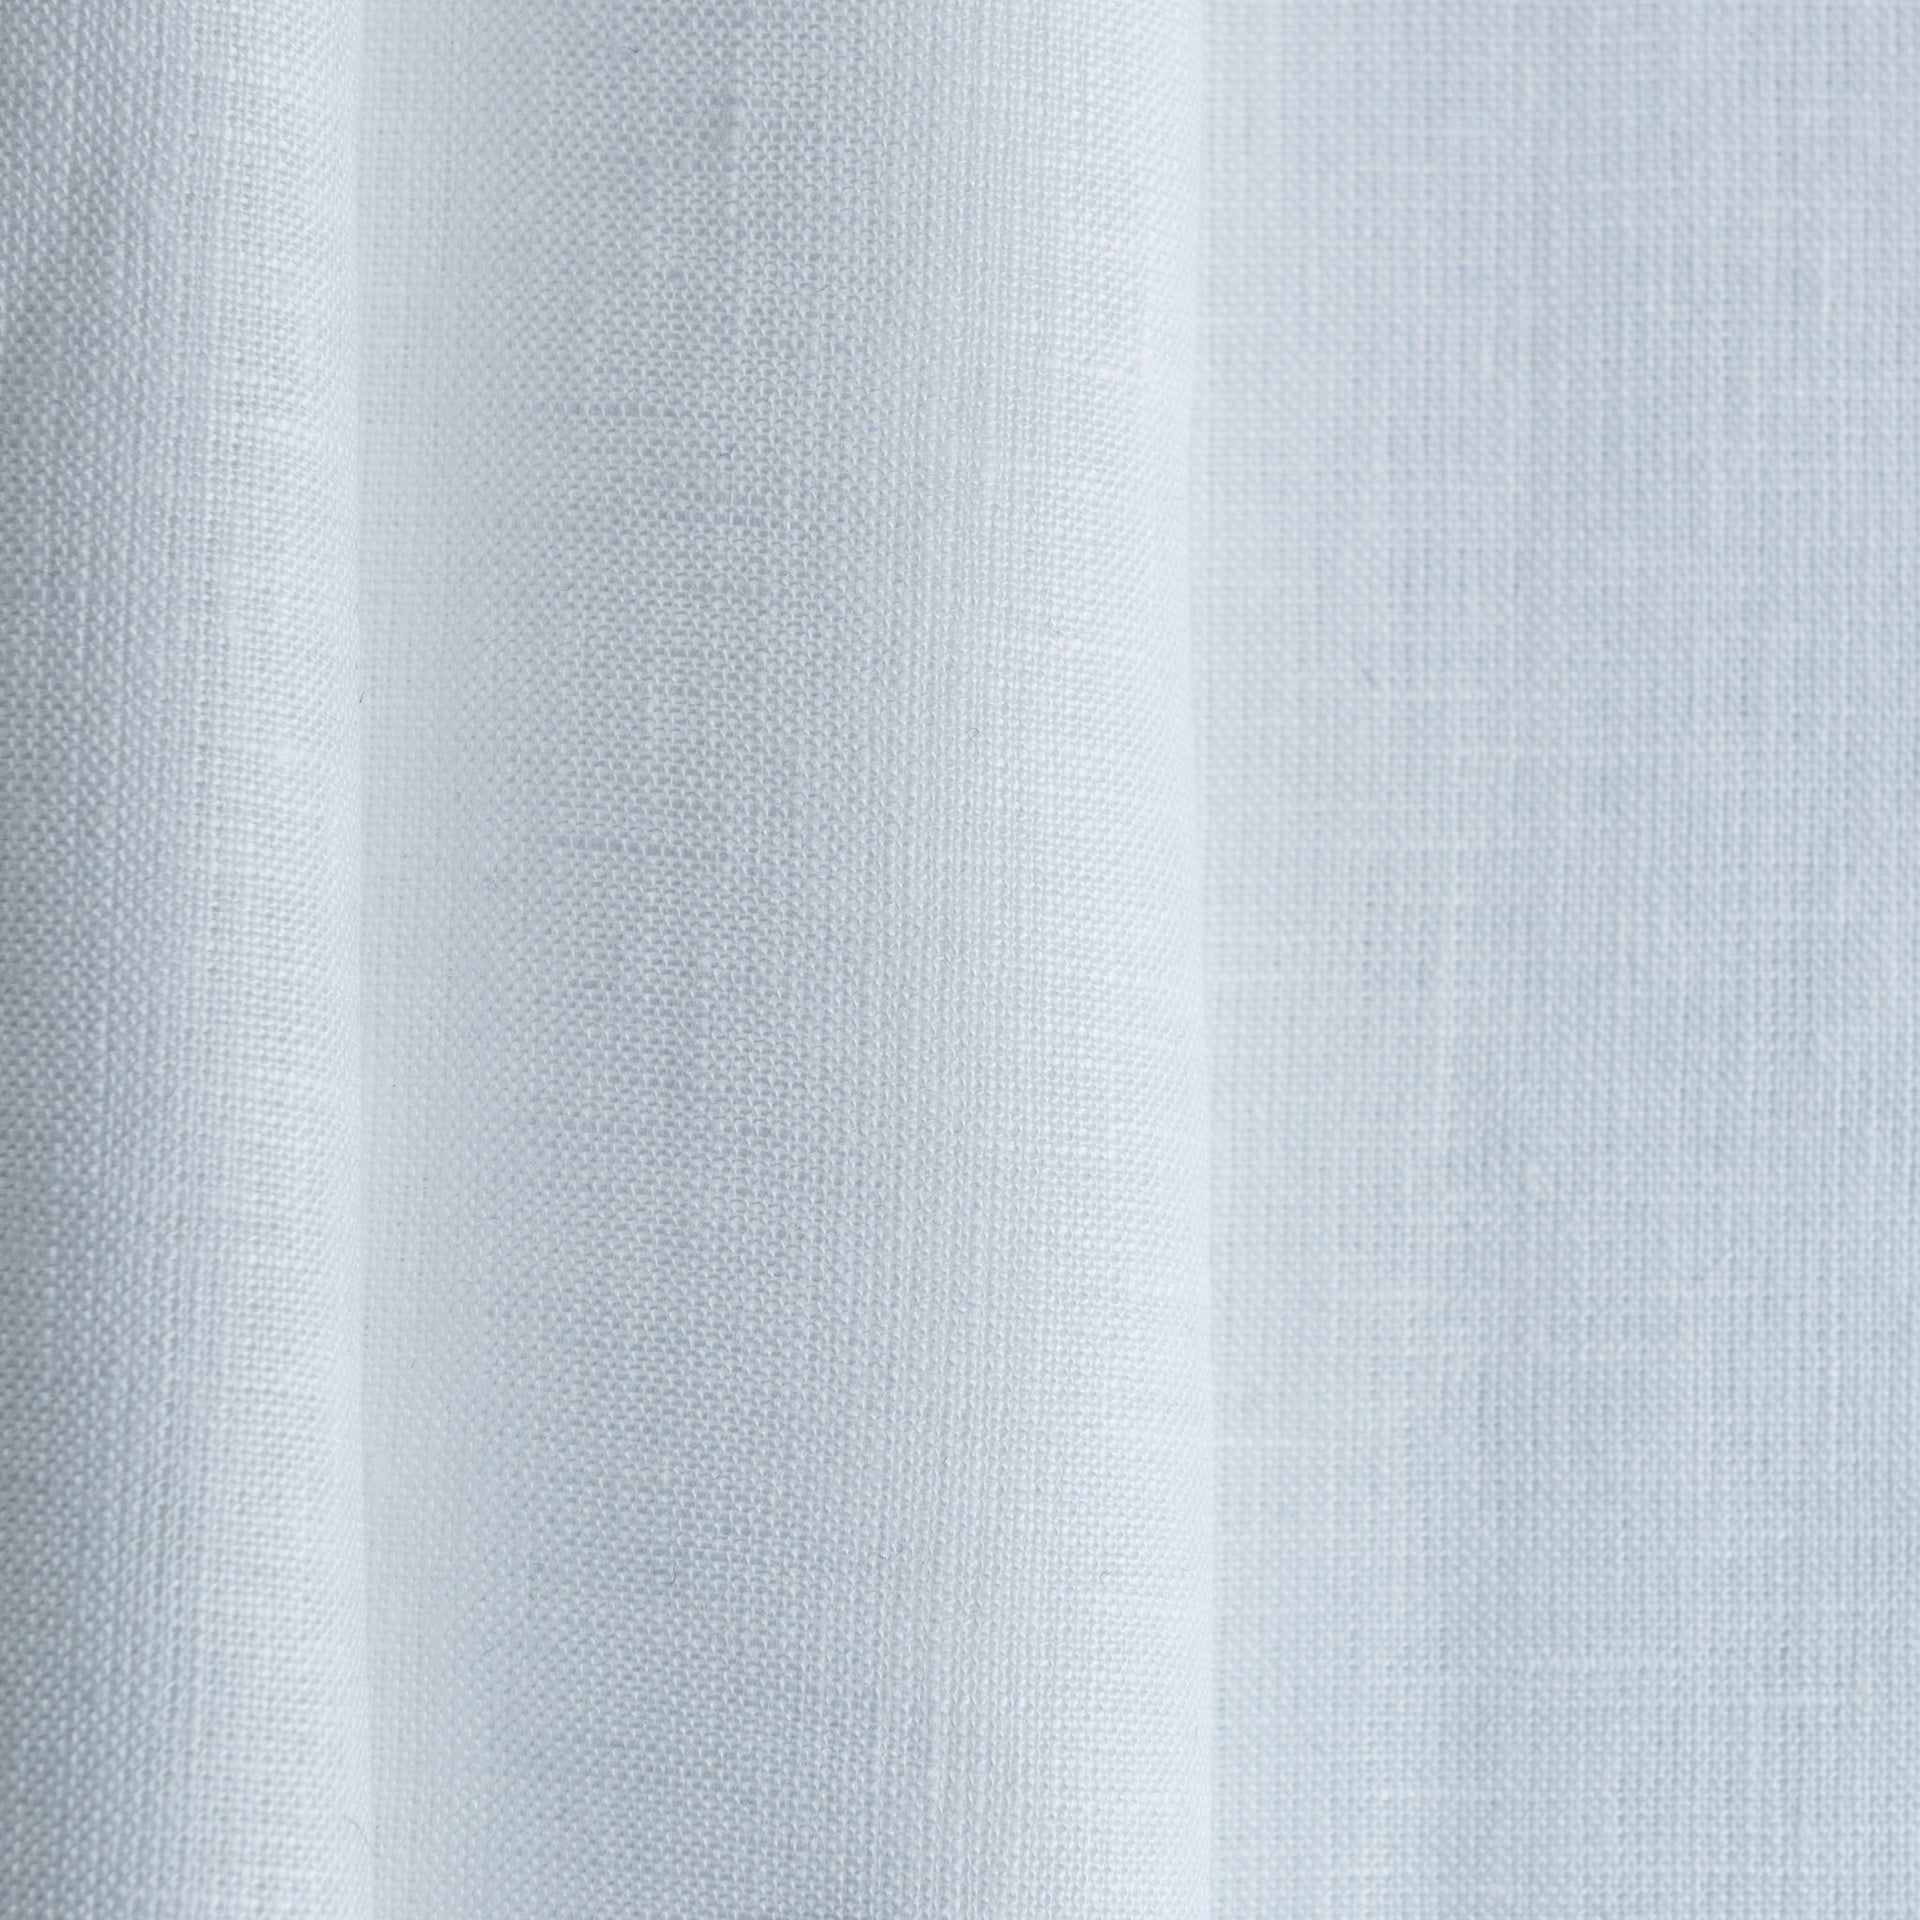 Linen Back Tab Curtain Panel with White Blackout Lining - Custom Width, Custom Length, Color: White